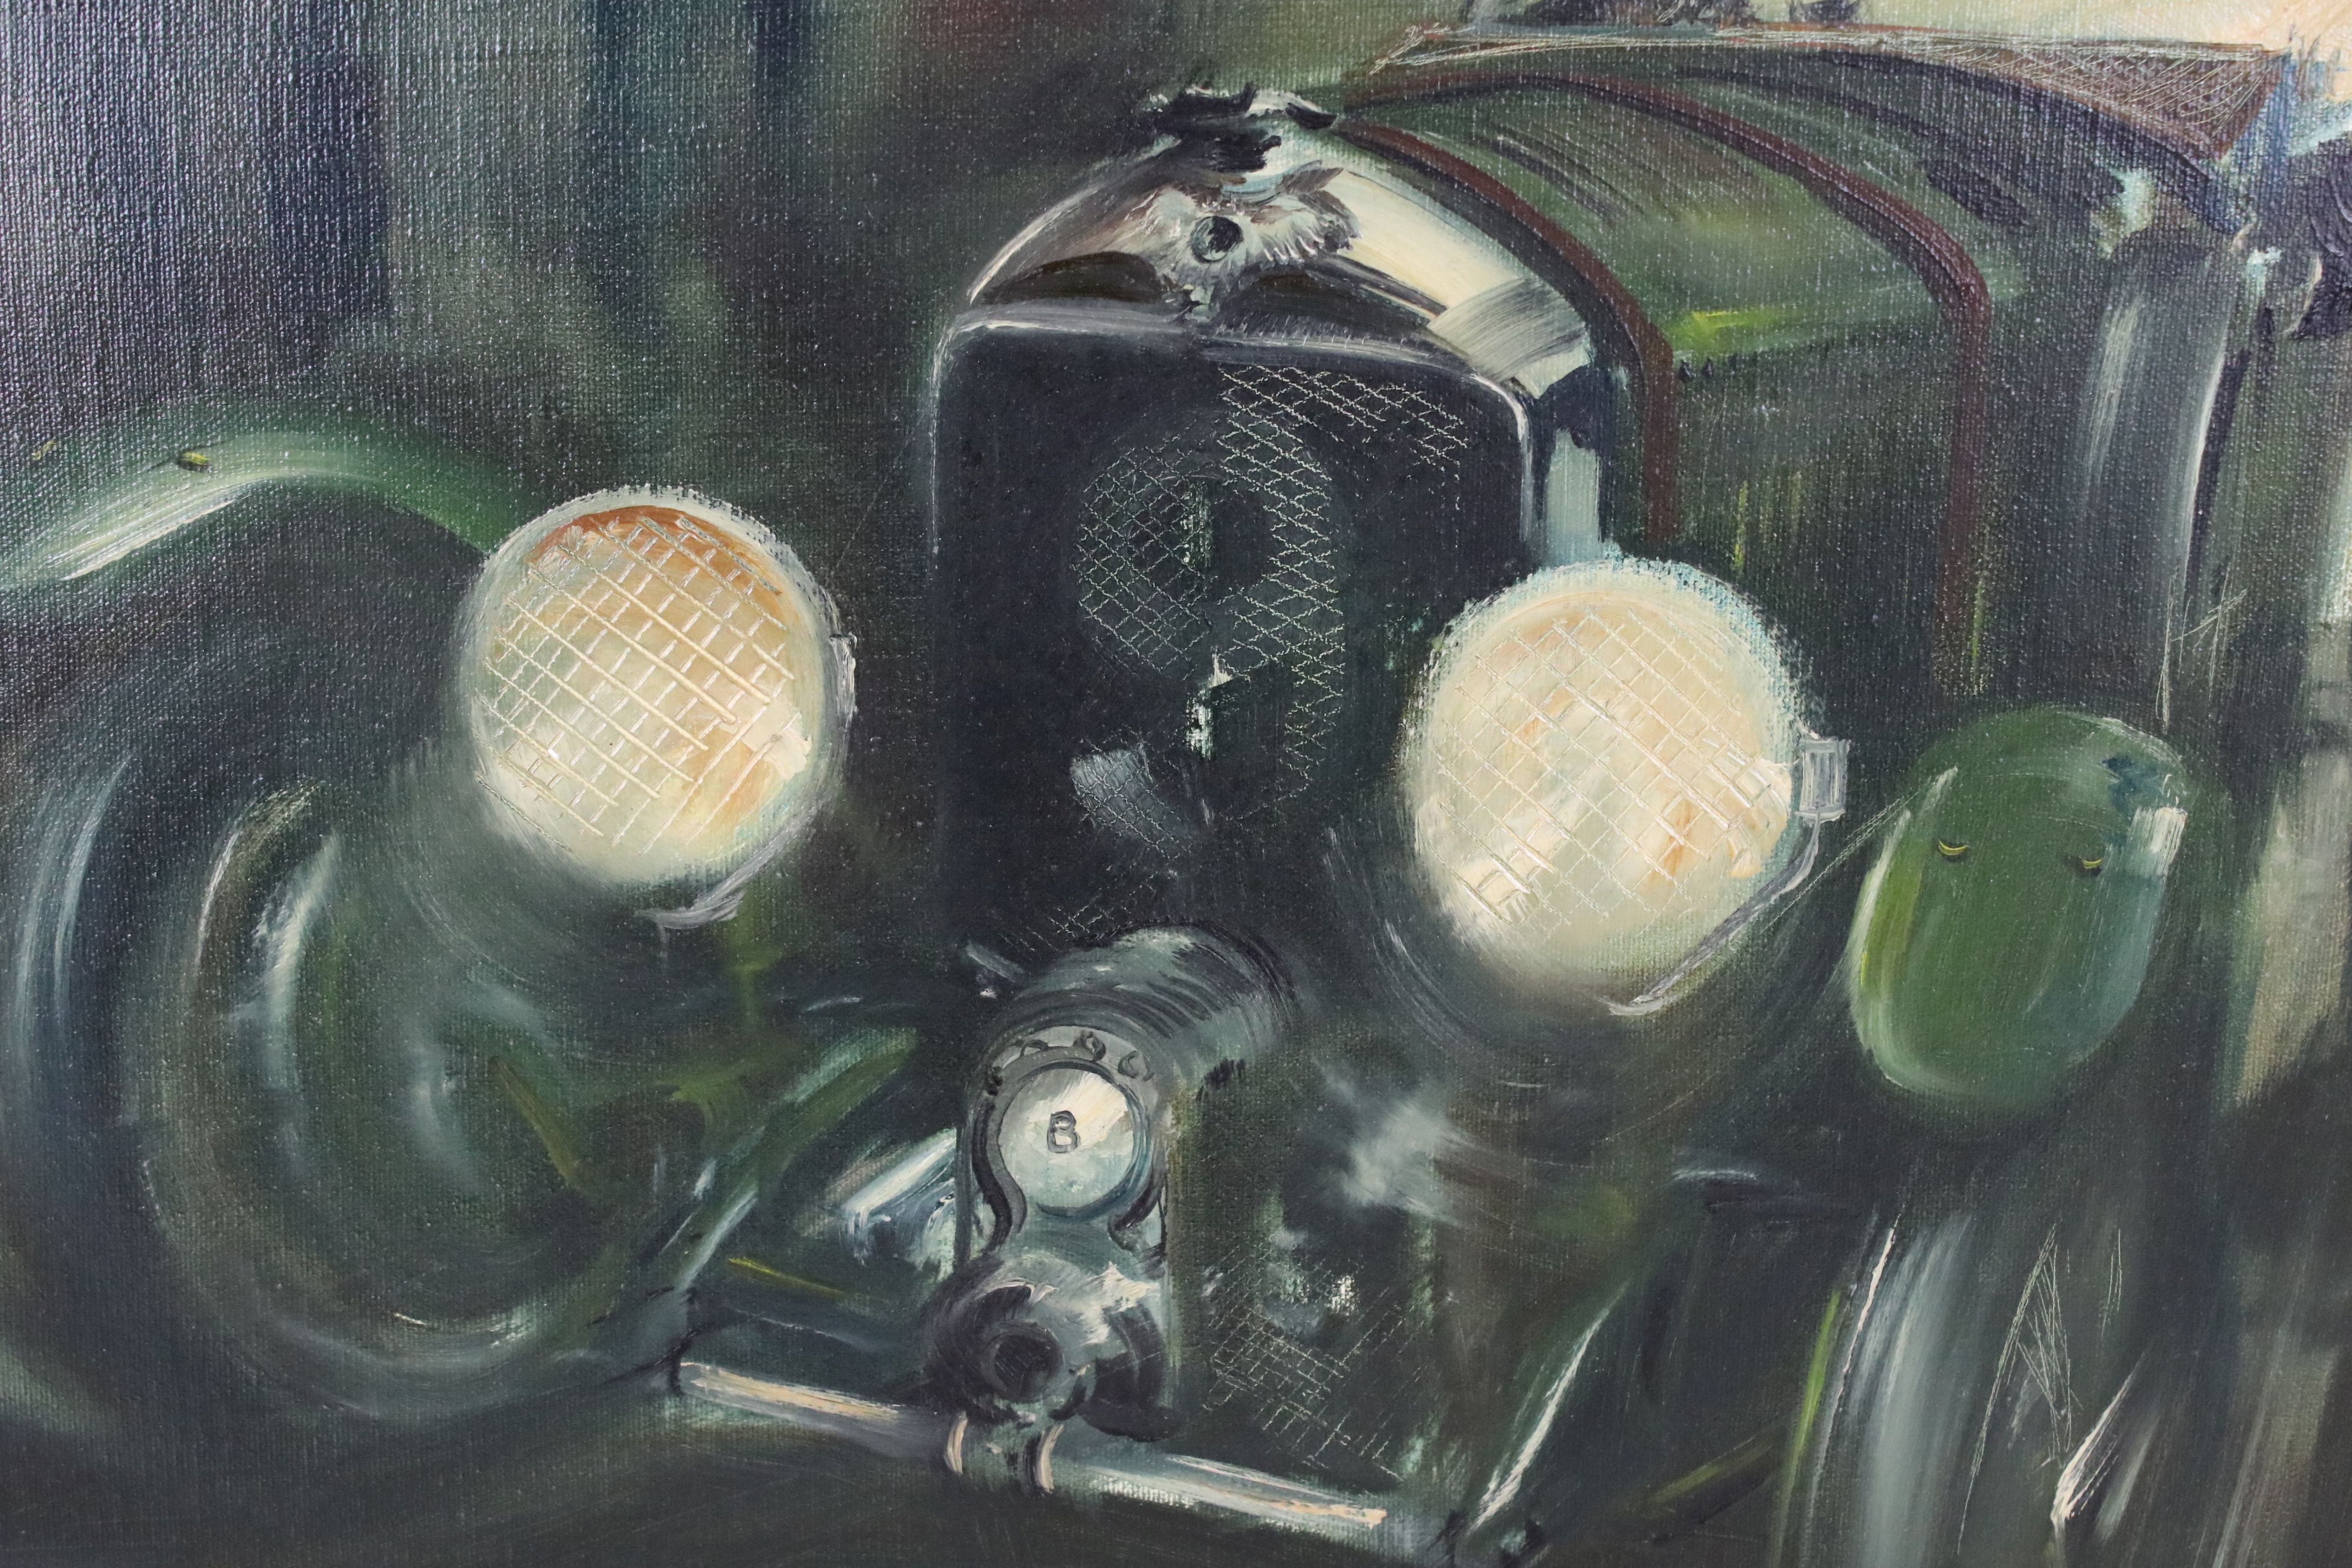 Dion Pears (1929 - 1985) Oil Painting on Canvas of a Vintage Racing Bentley Car, signed lower right, - Image 3 of 5